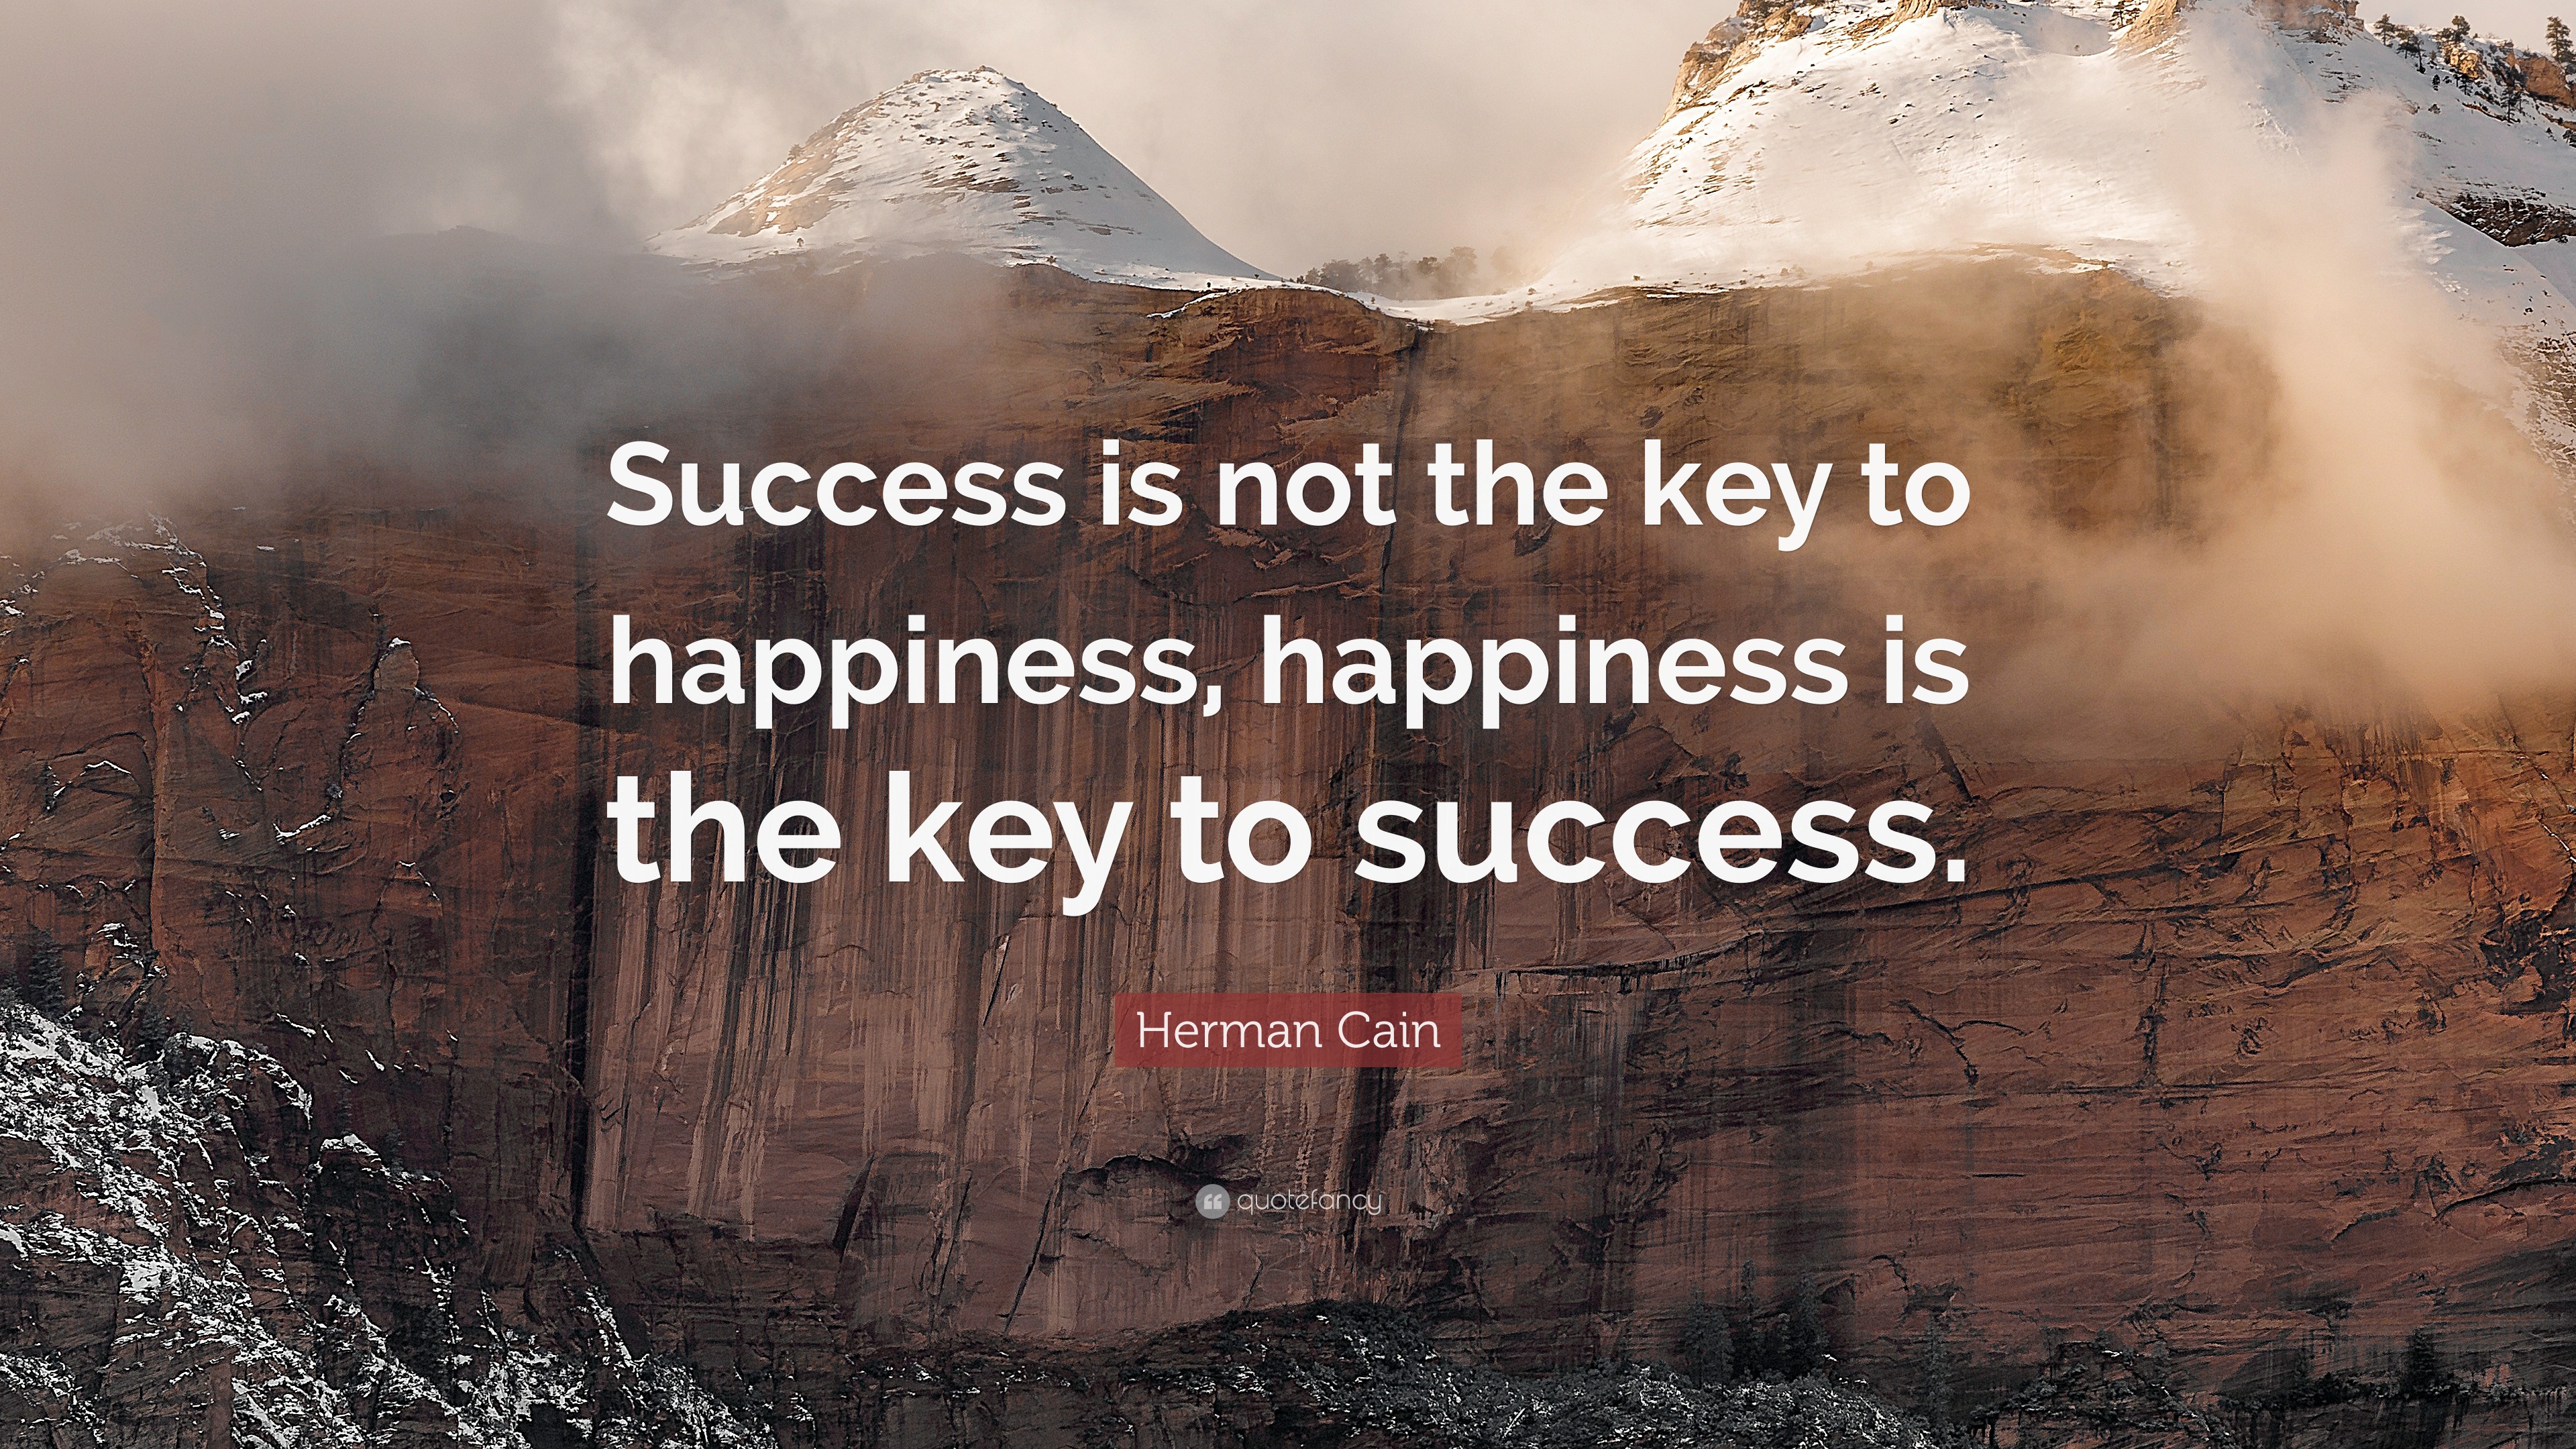 Herman Cain Quote “Success is not the key to happiness, happiness is